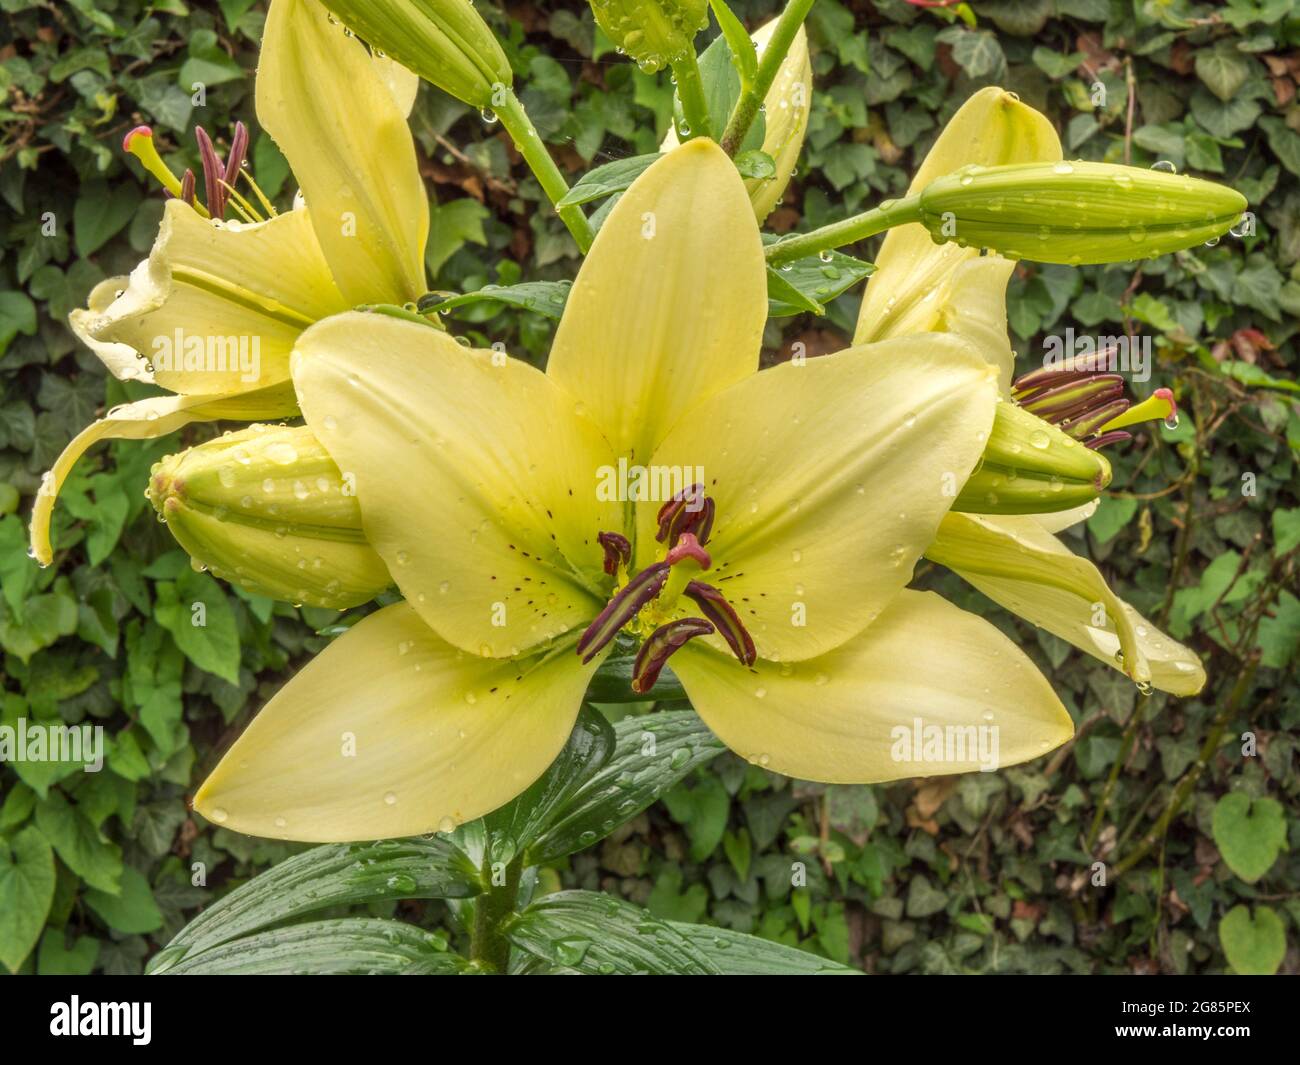 Closeup POV shot of a newly flowering group of pale green lilies and buds, wet after rainfall, growing in a garden / yard. Stock Photo